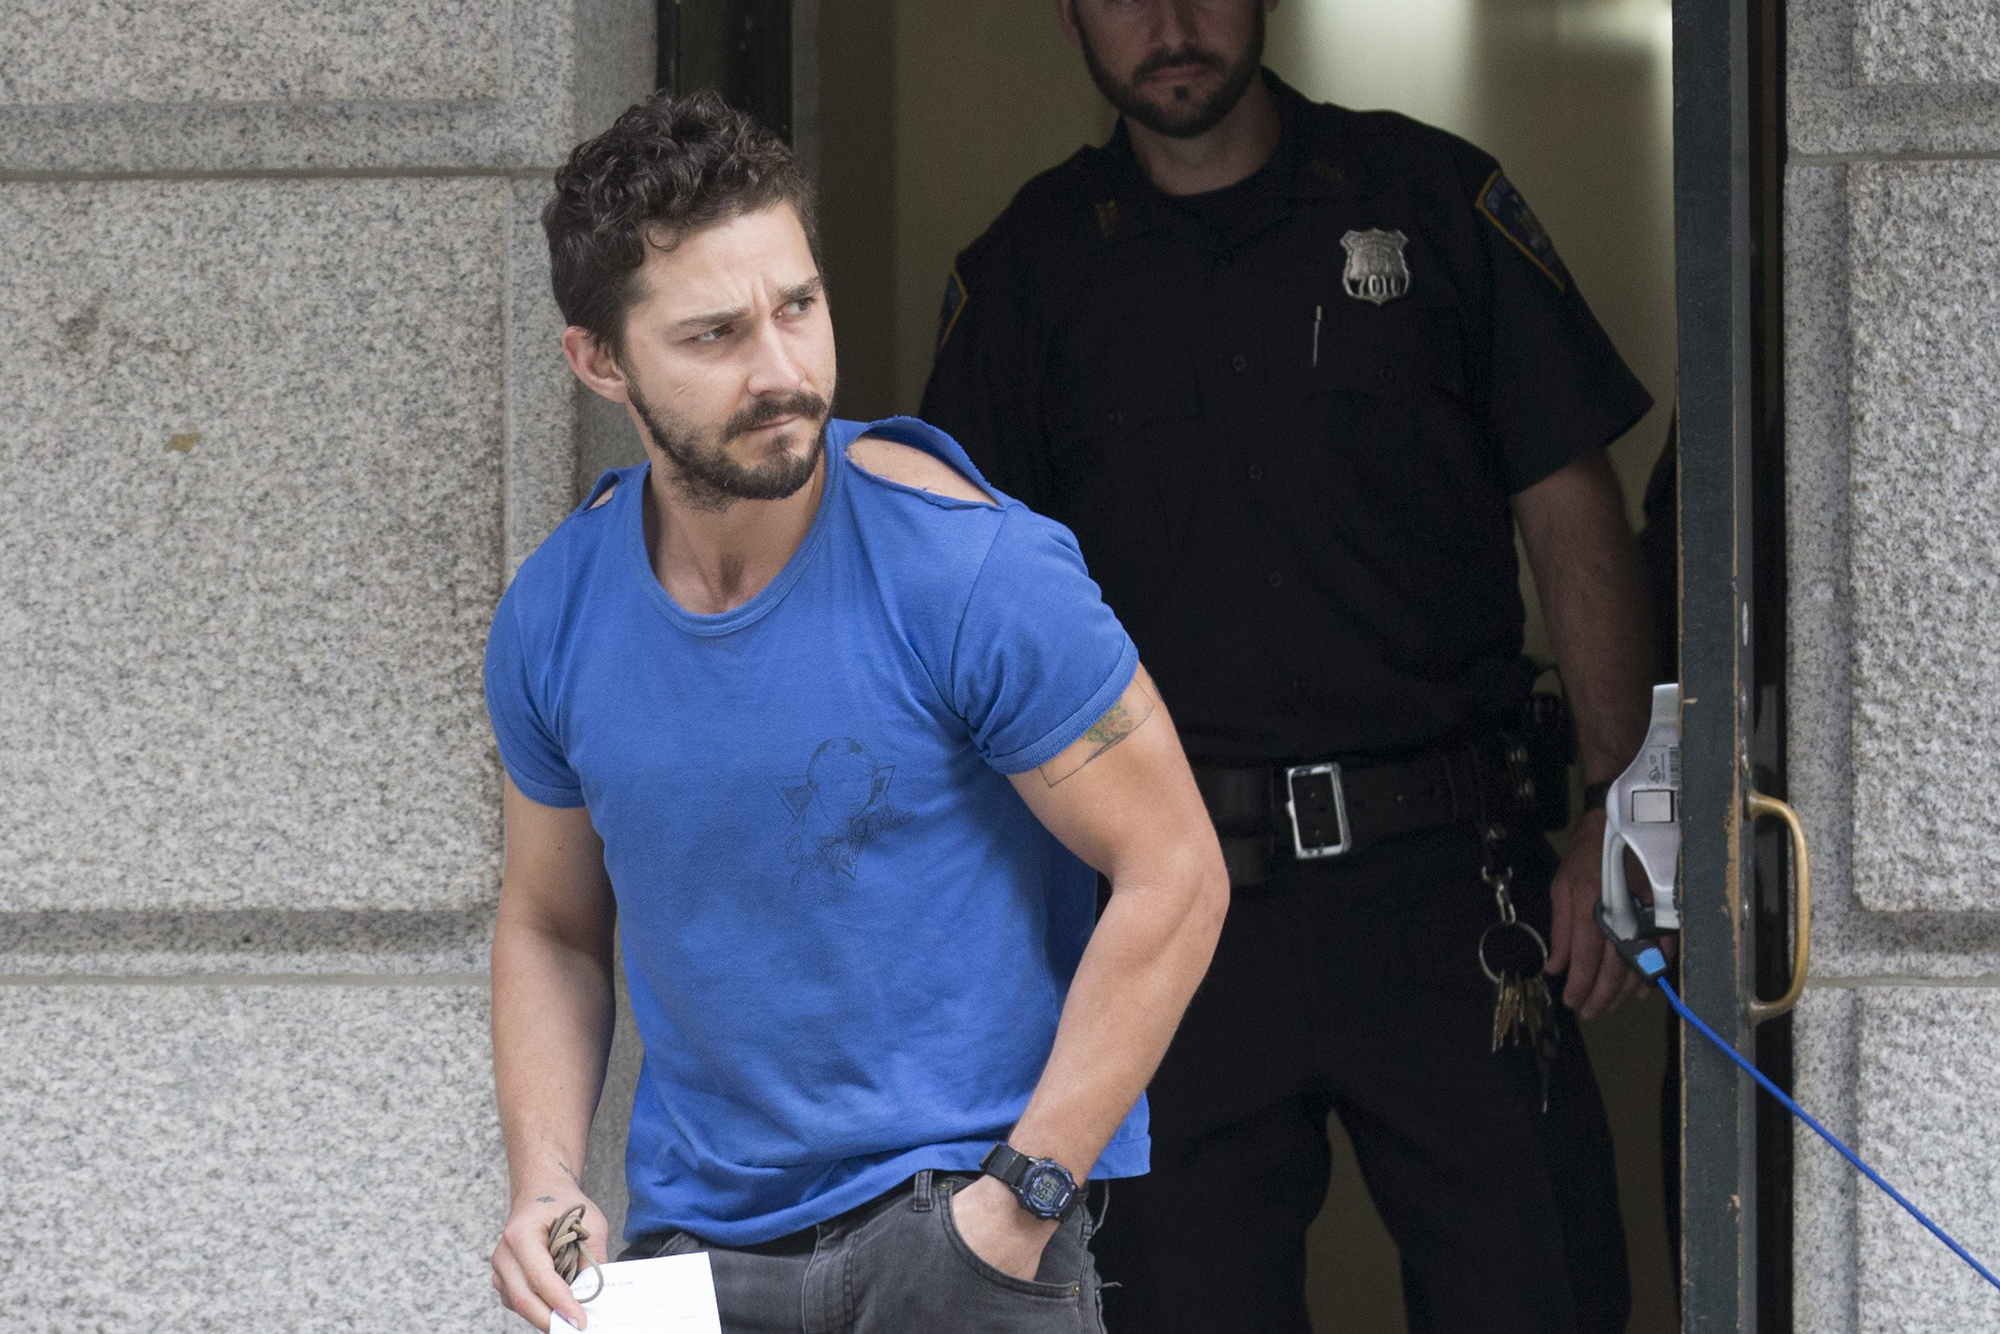 Actor Shia LaBeouf leaves Midtown Community Court after being arrested the previous day for yelling obscenities at the Broadway show "Cabaret," June 27, 2014, in New York.